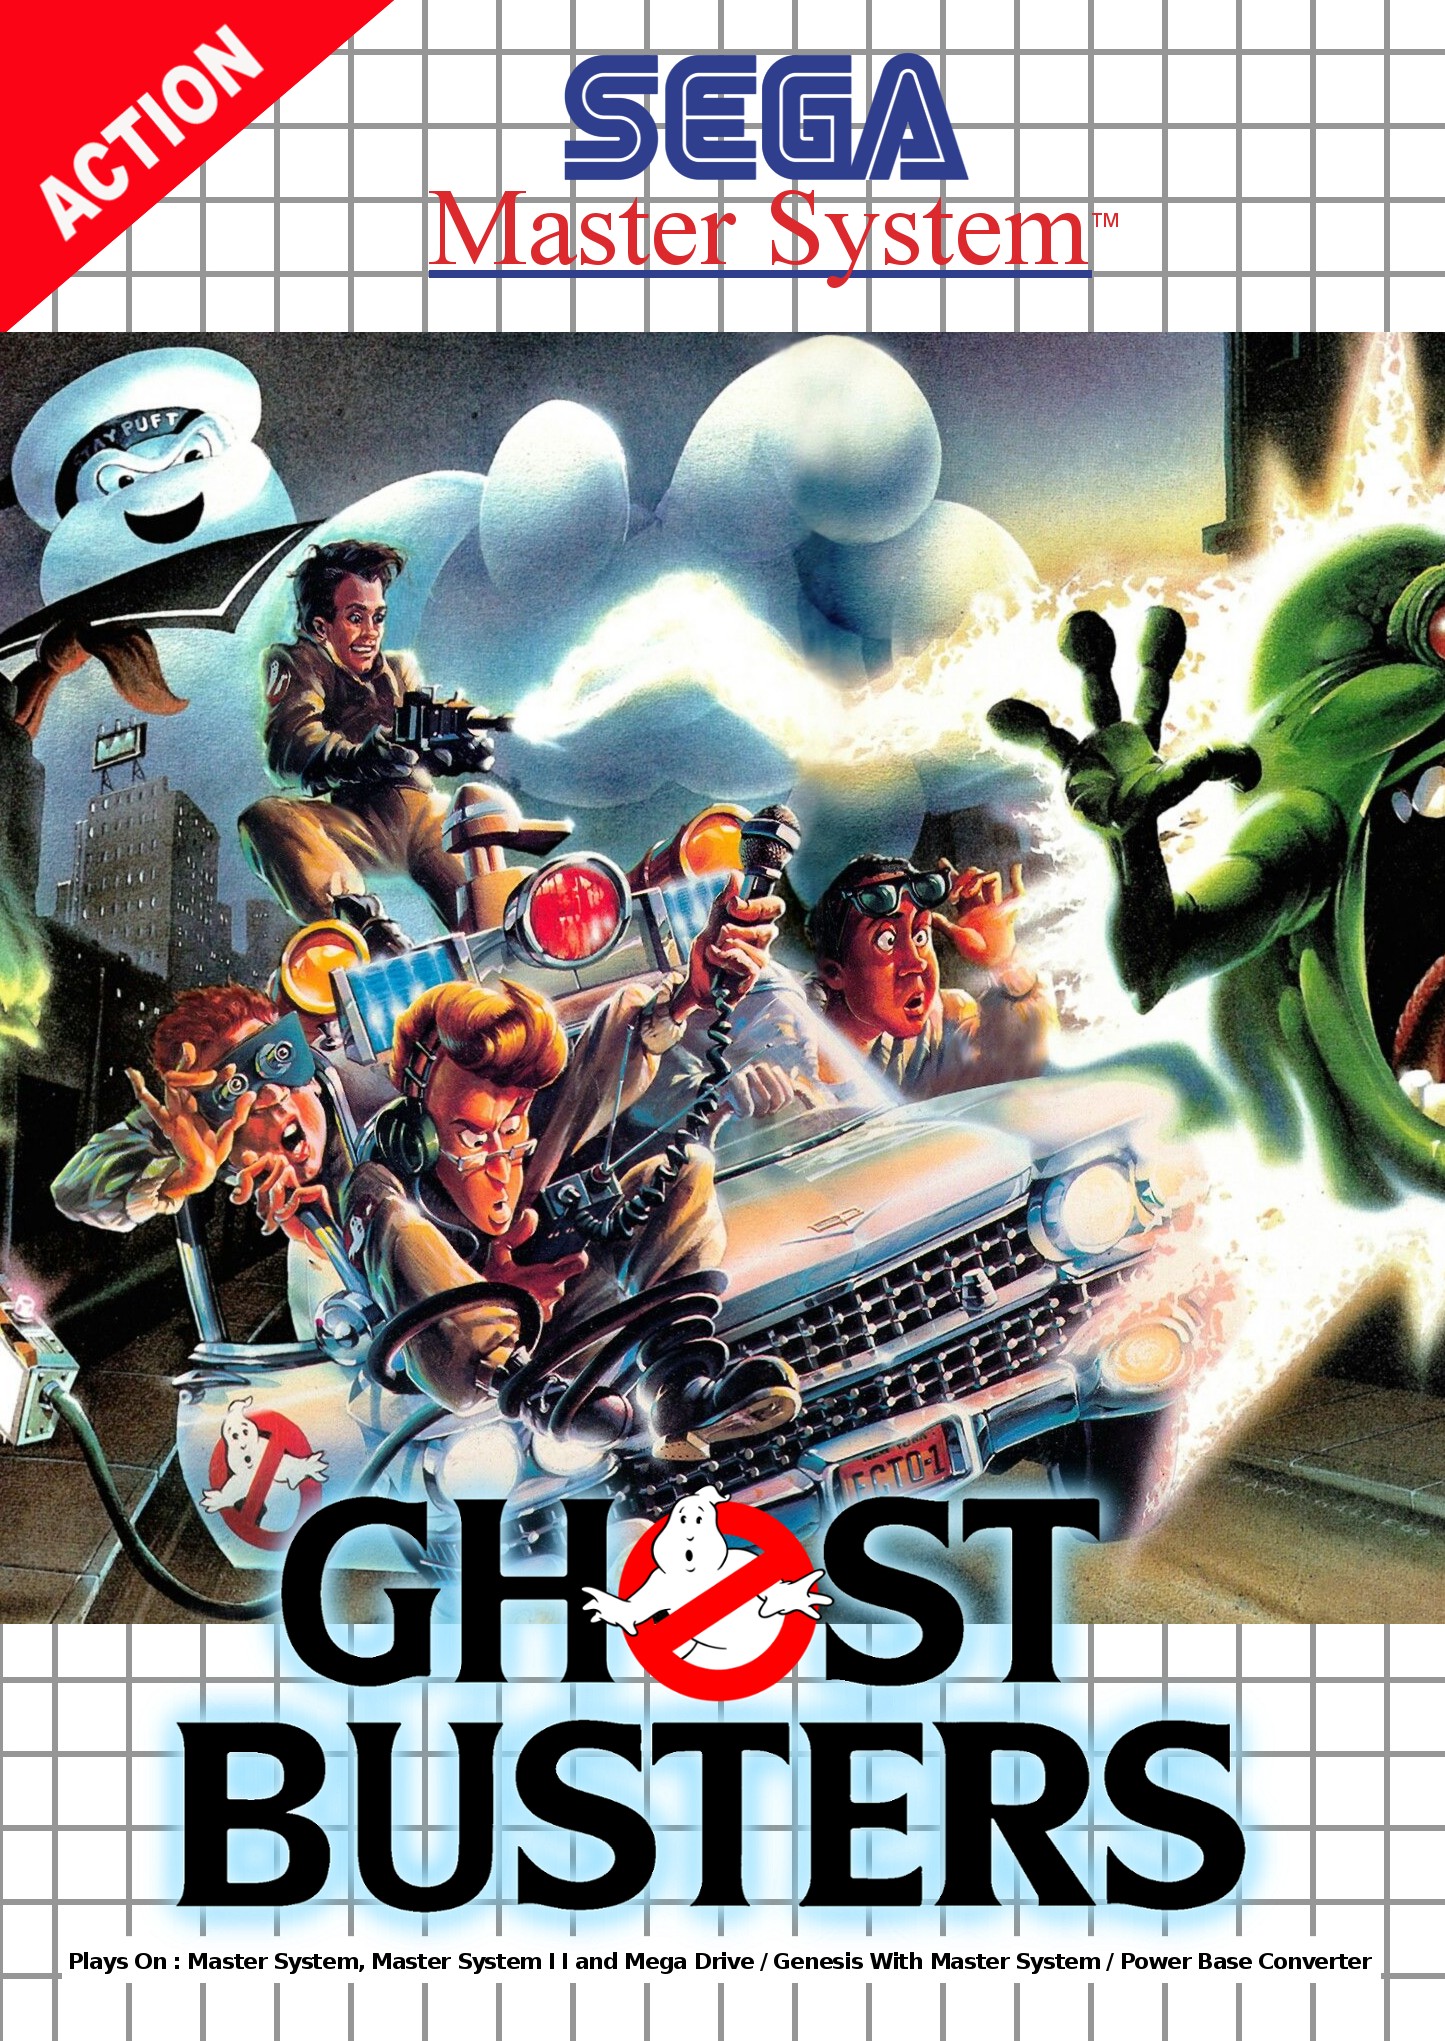 'GhostBusters' (Ghost Busters)